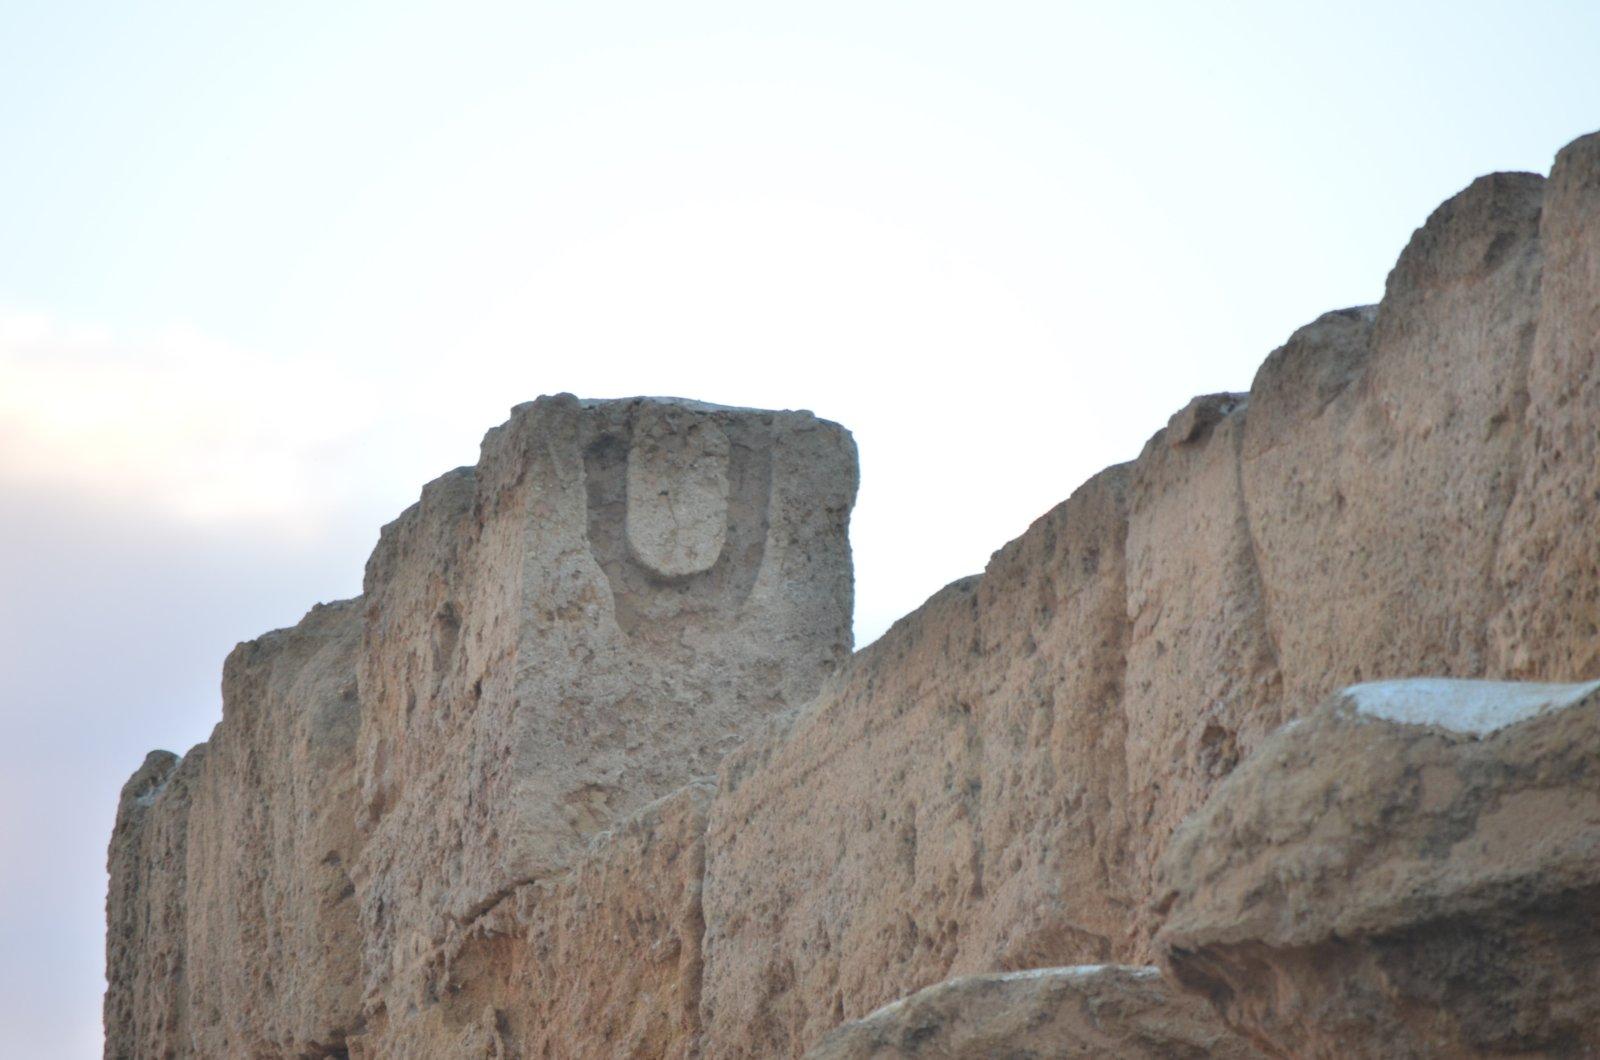 The "u" shows where the rope would have been inserted to lift the huge rocks.